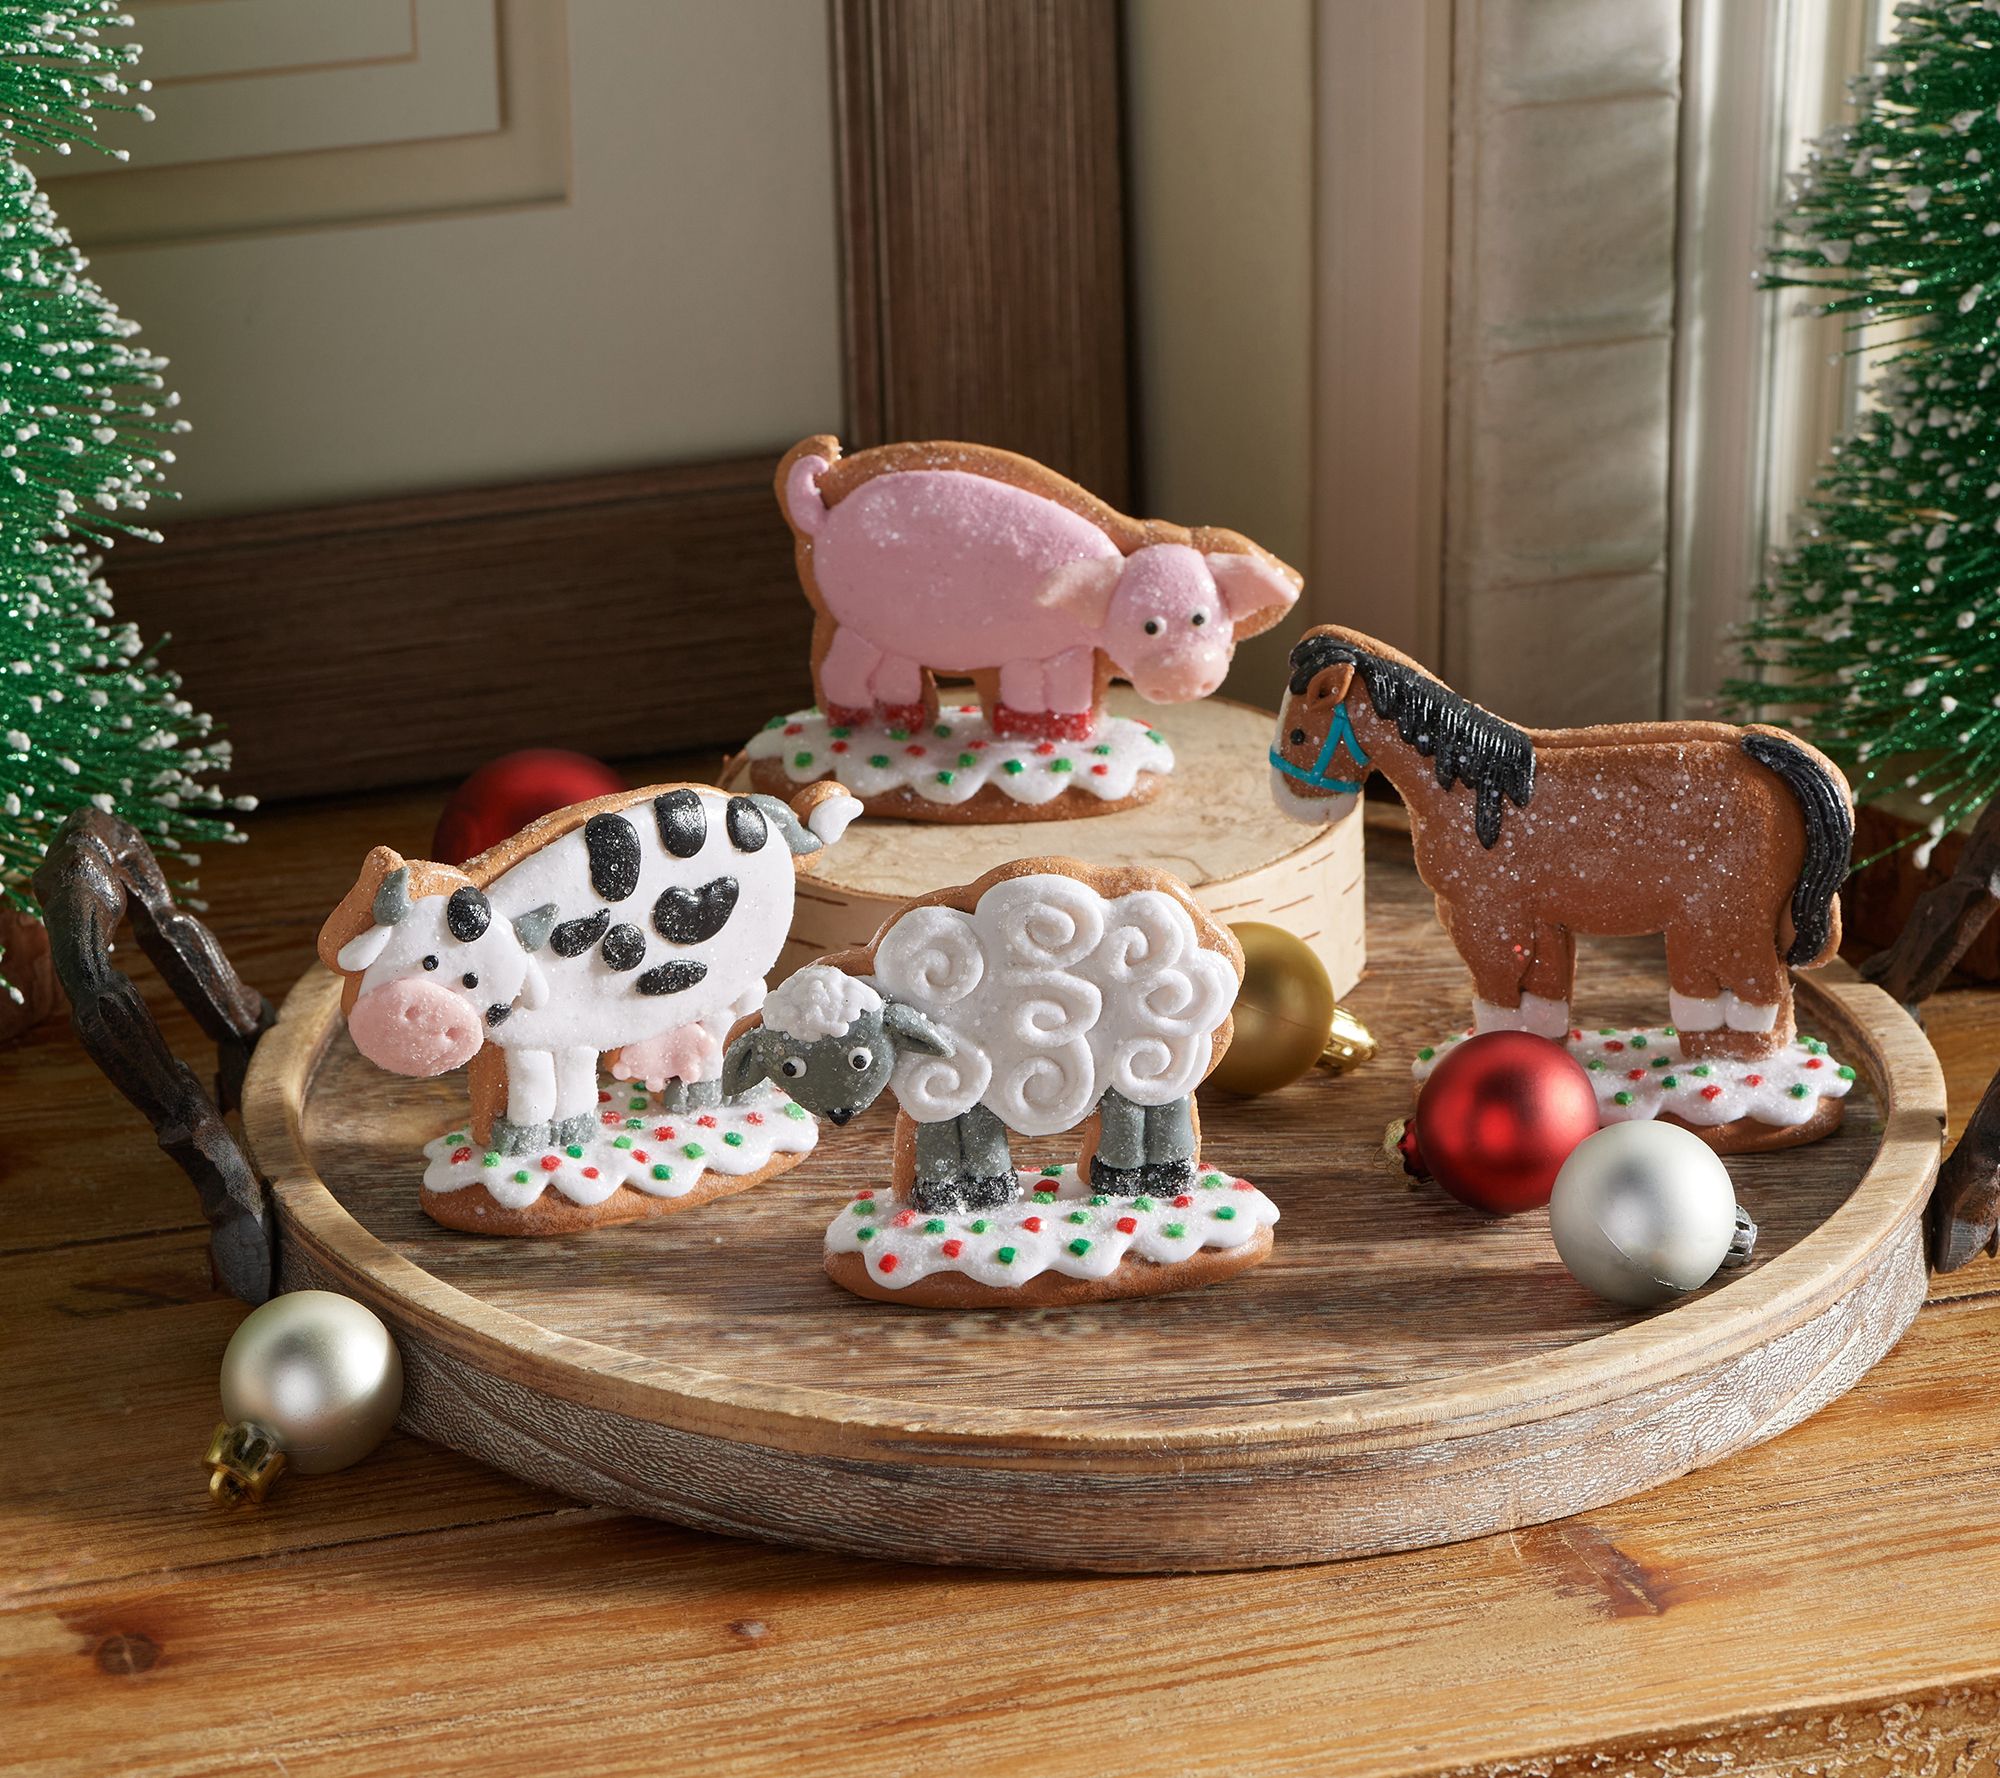 Set of 4 Gingerbread Animal Figures by Valerie - QVC.com